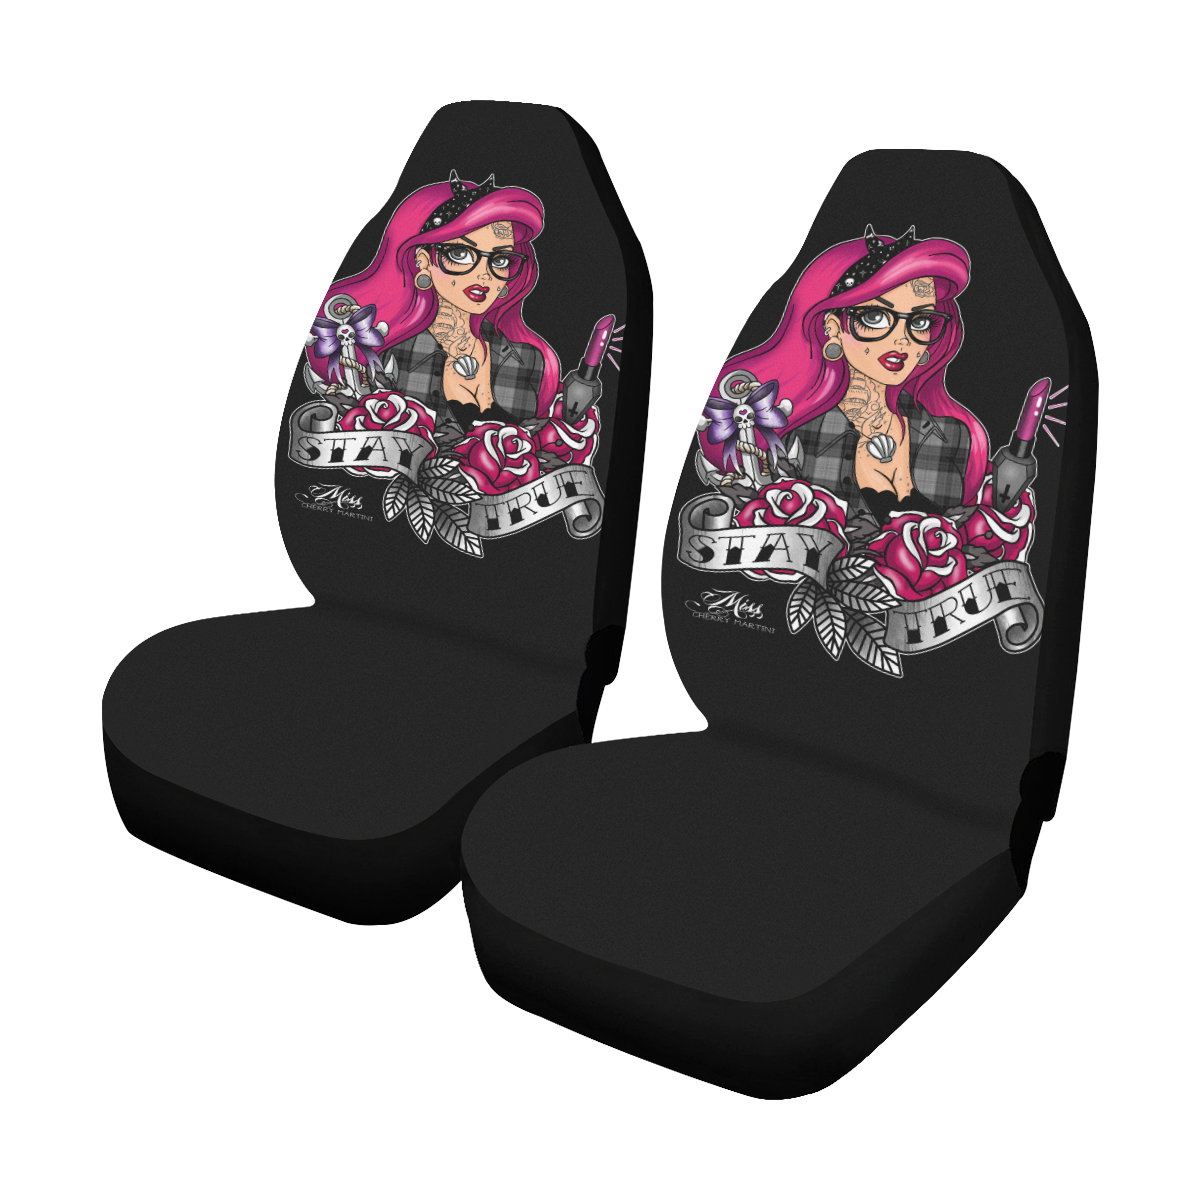 Stay True Seat Covers Car Seat Covers (Set of 2)